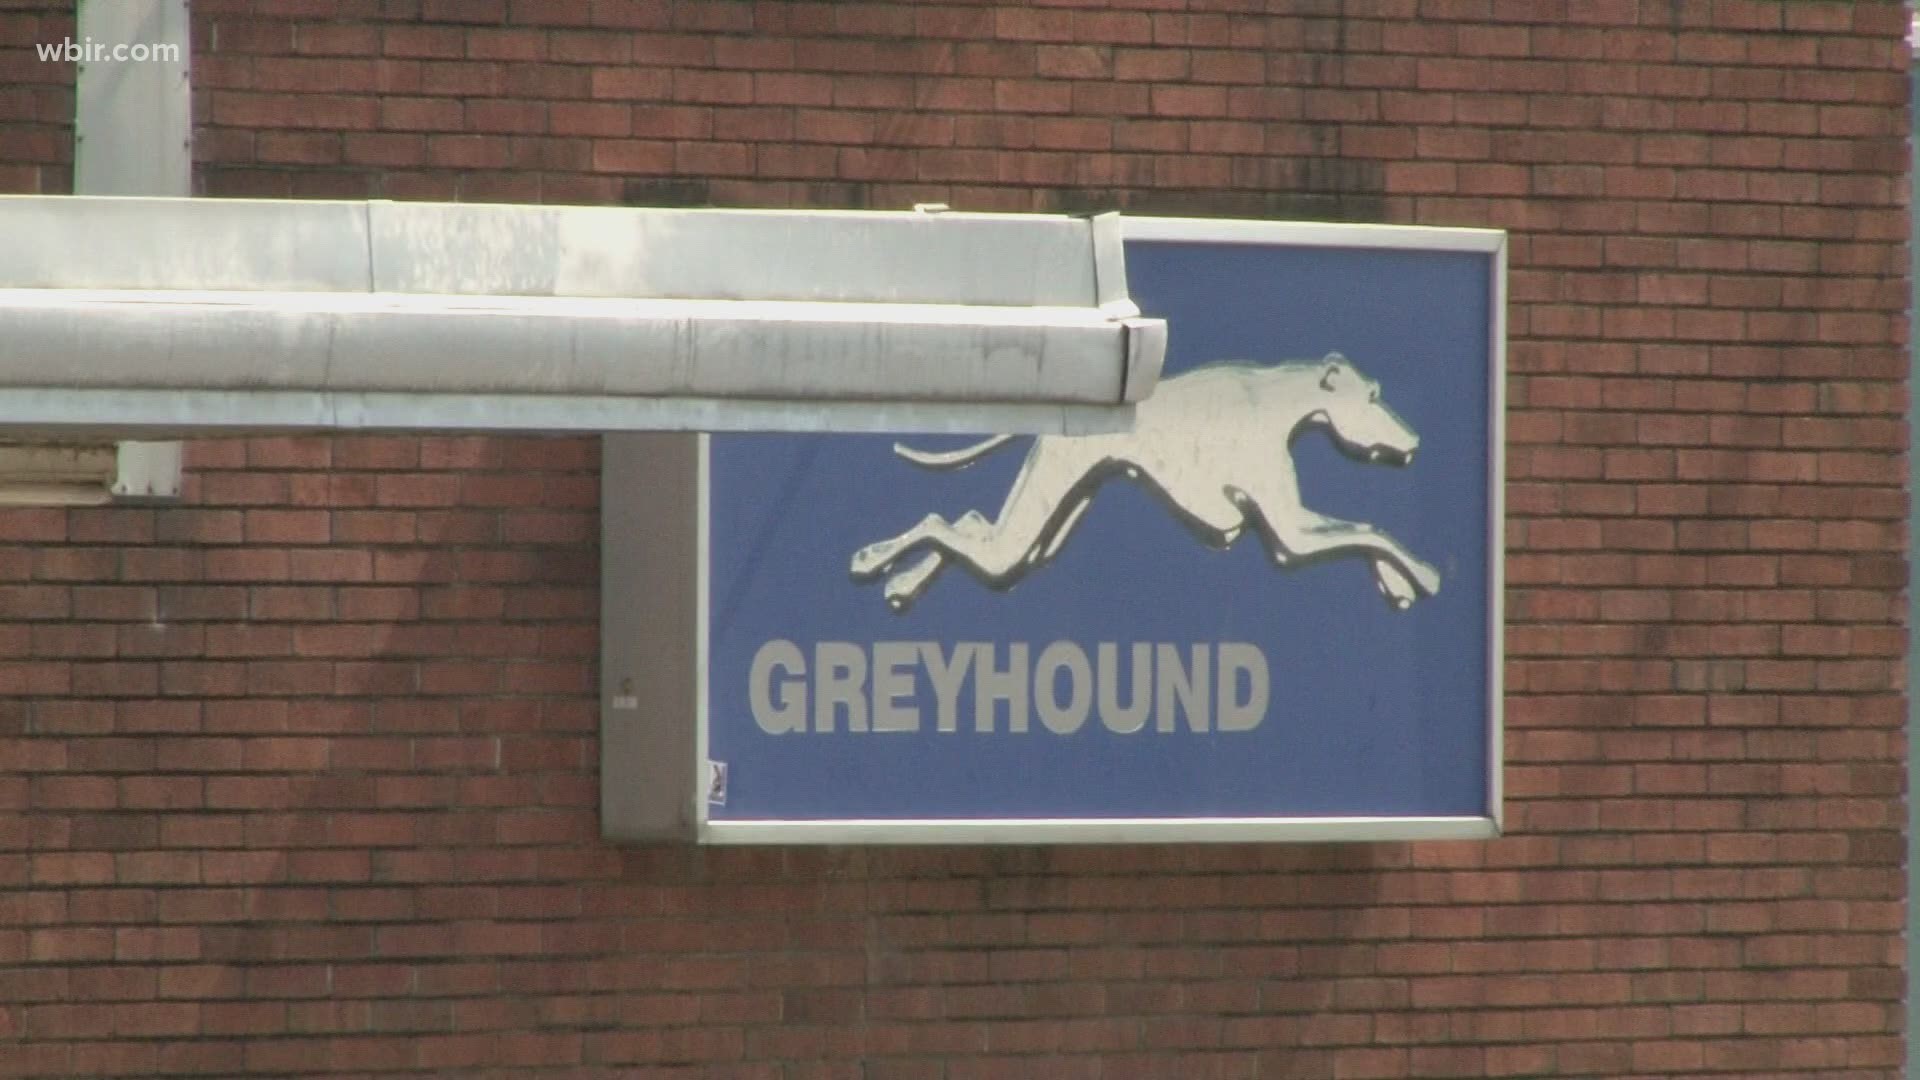 The greyhound bus station in downtown Knoxville is now up for sale.